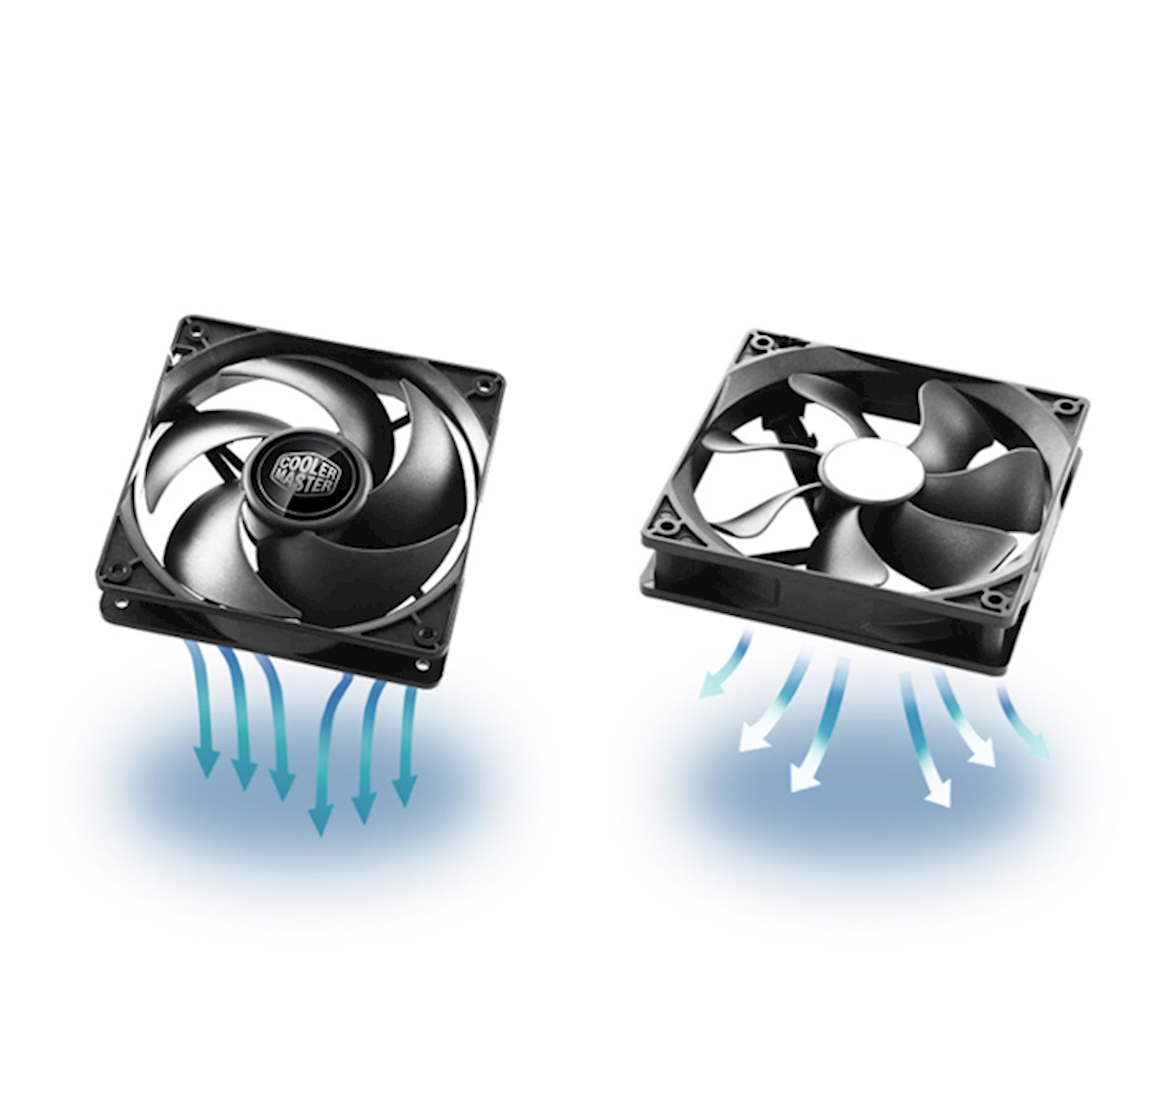 Protect your fan and generate more air pressure